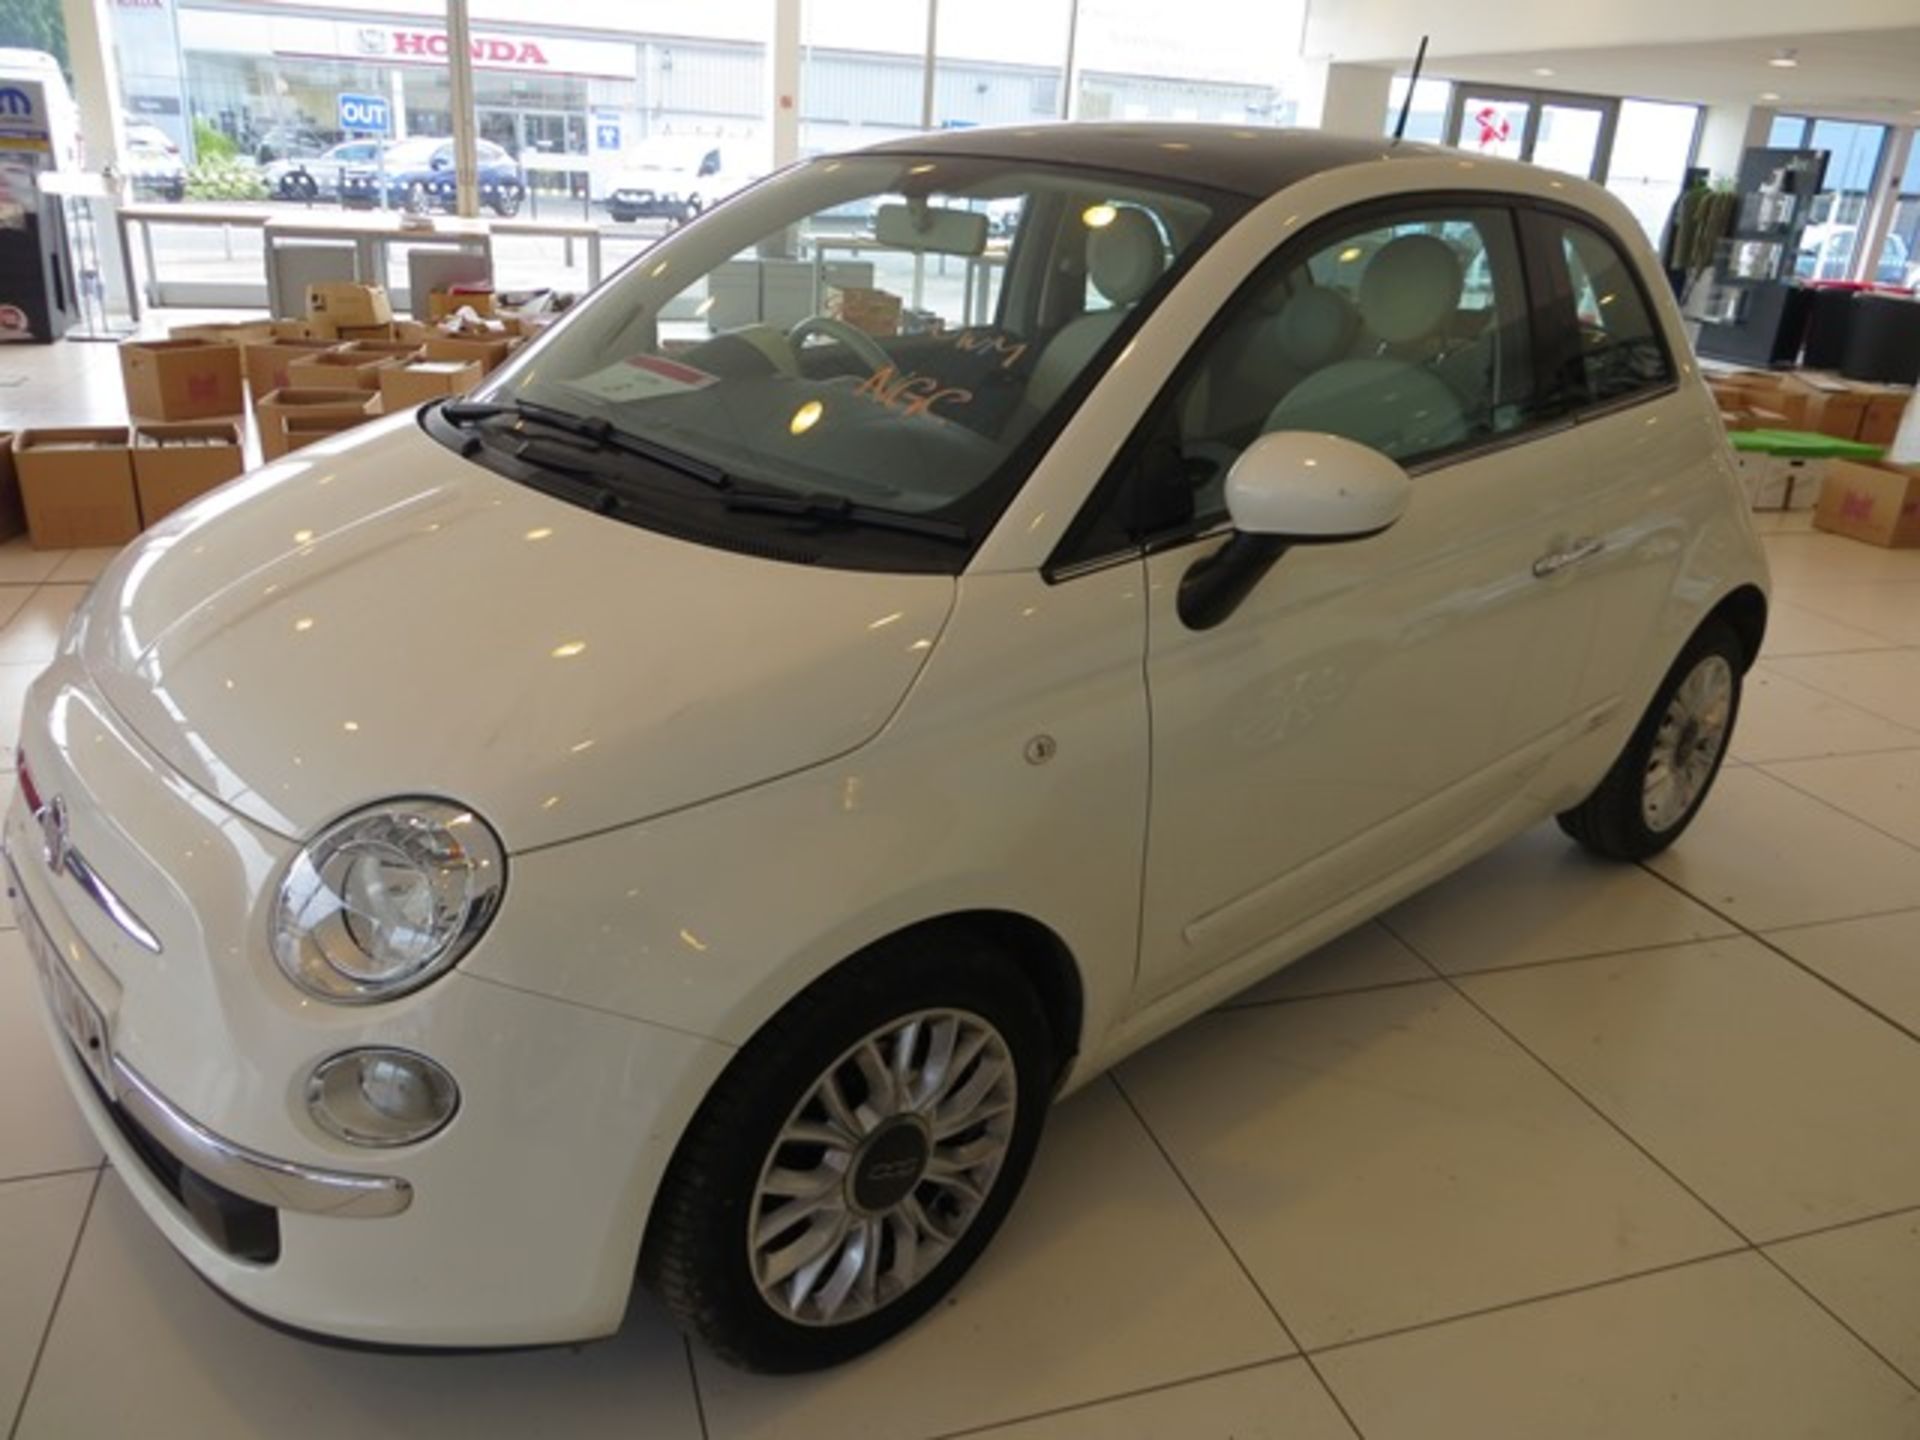 Fiat 500 twinair lounge petrol Auto 3 door hatchback, white, Air conditioning, alloy wheels, fixed - Image 3 of 7